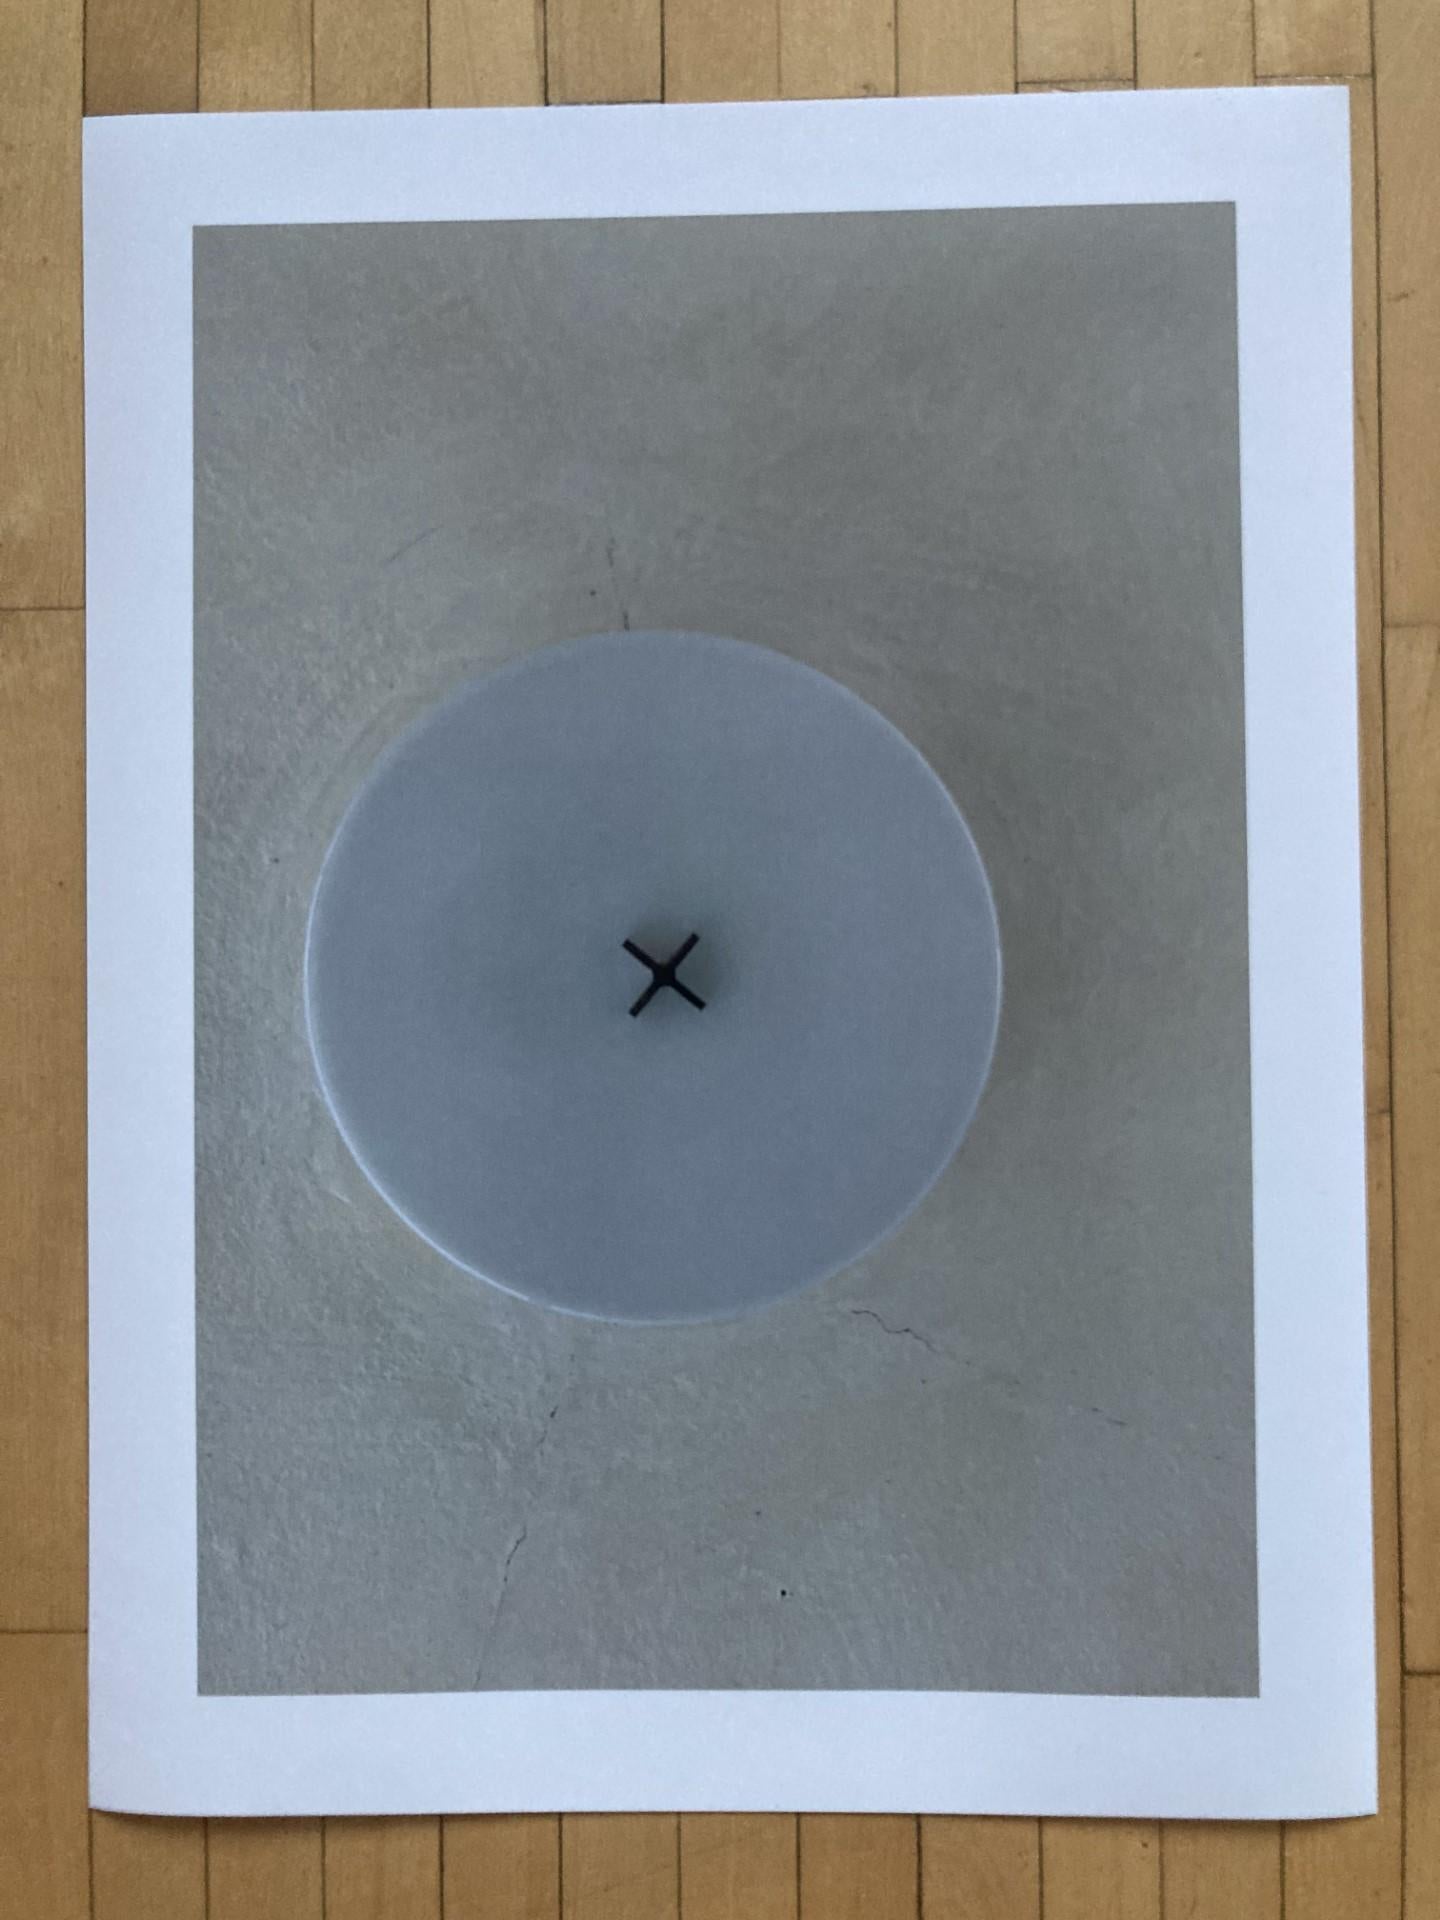 Button OR? Photopgraphy Print Limited - Gray Abstract Print by Sandra Salamonová